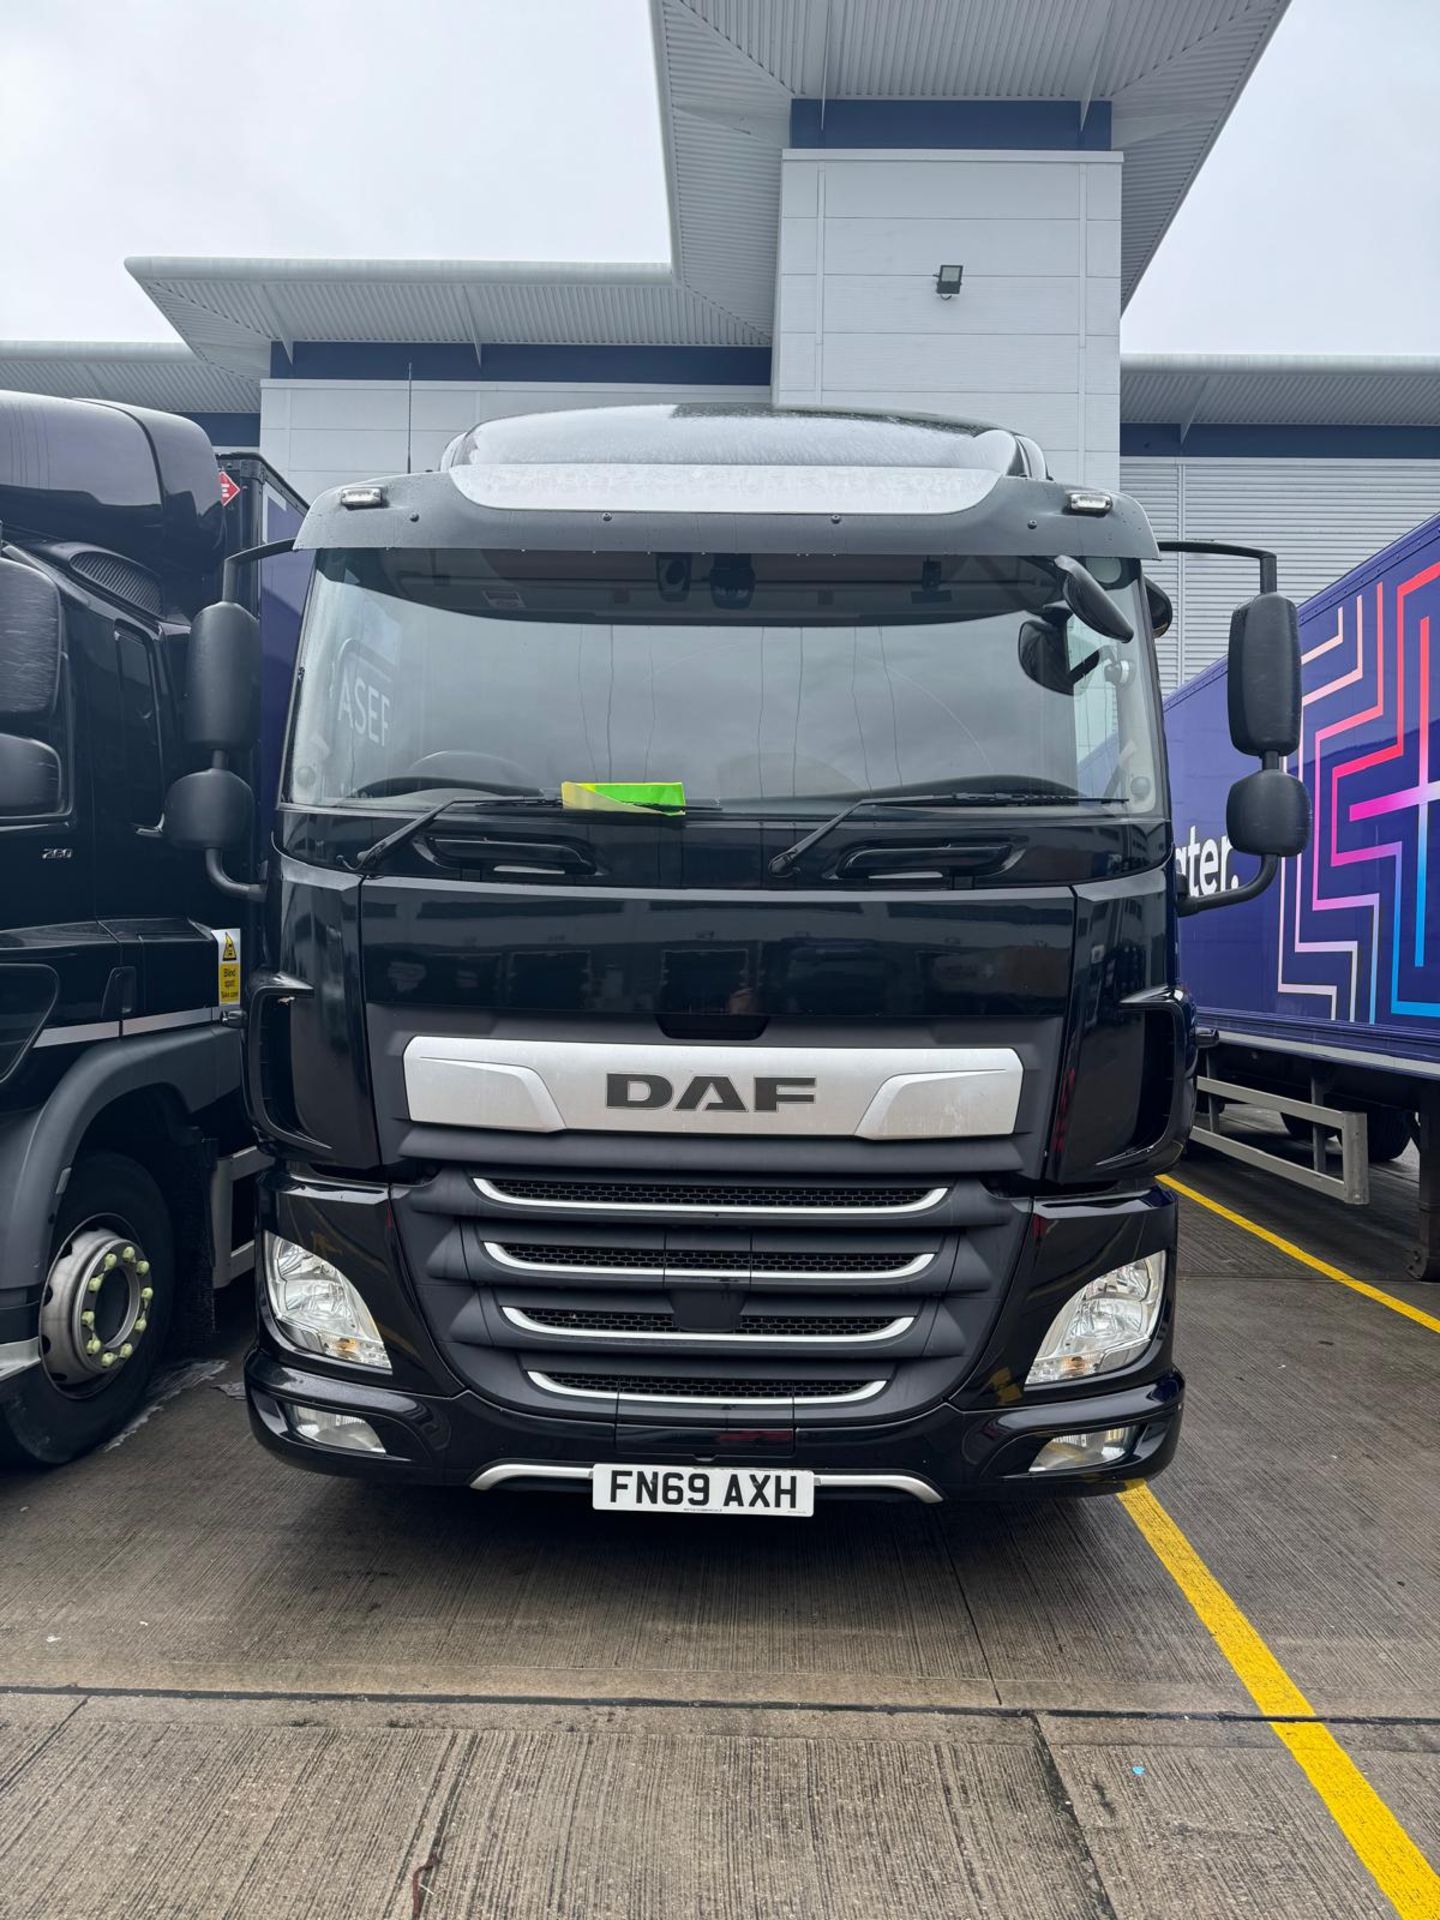 2019, DAF CF 260 FA (Ex-Fleet Owned & Maintained) - FN69 AXH (18 Ton Rigid Truck with Tail Lift) - Bild 5 aus 22